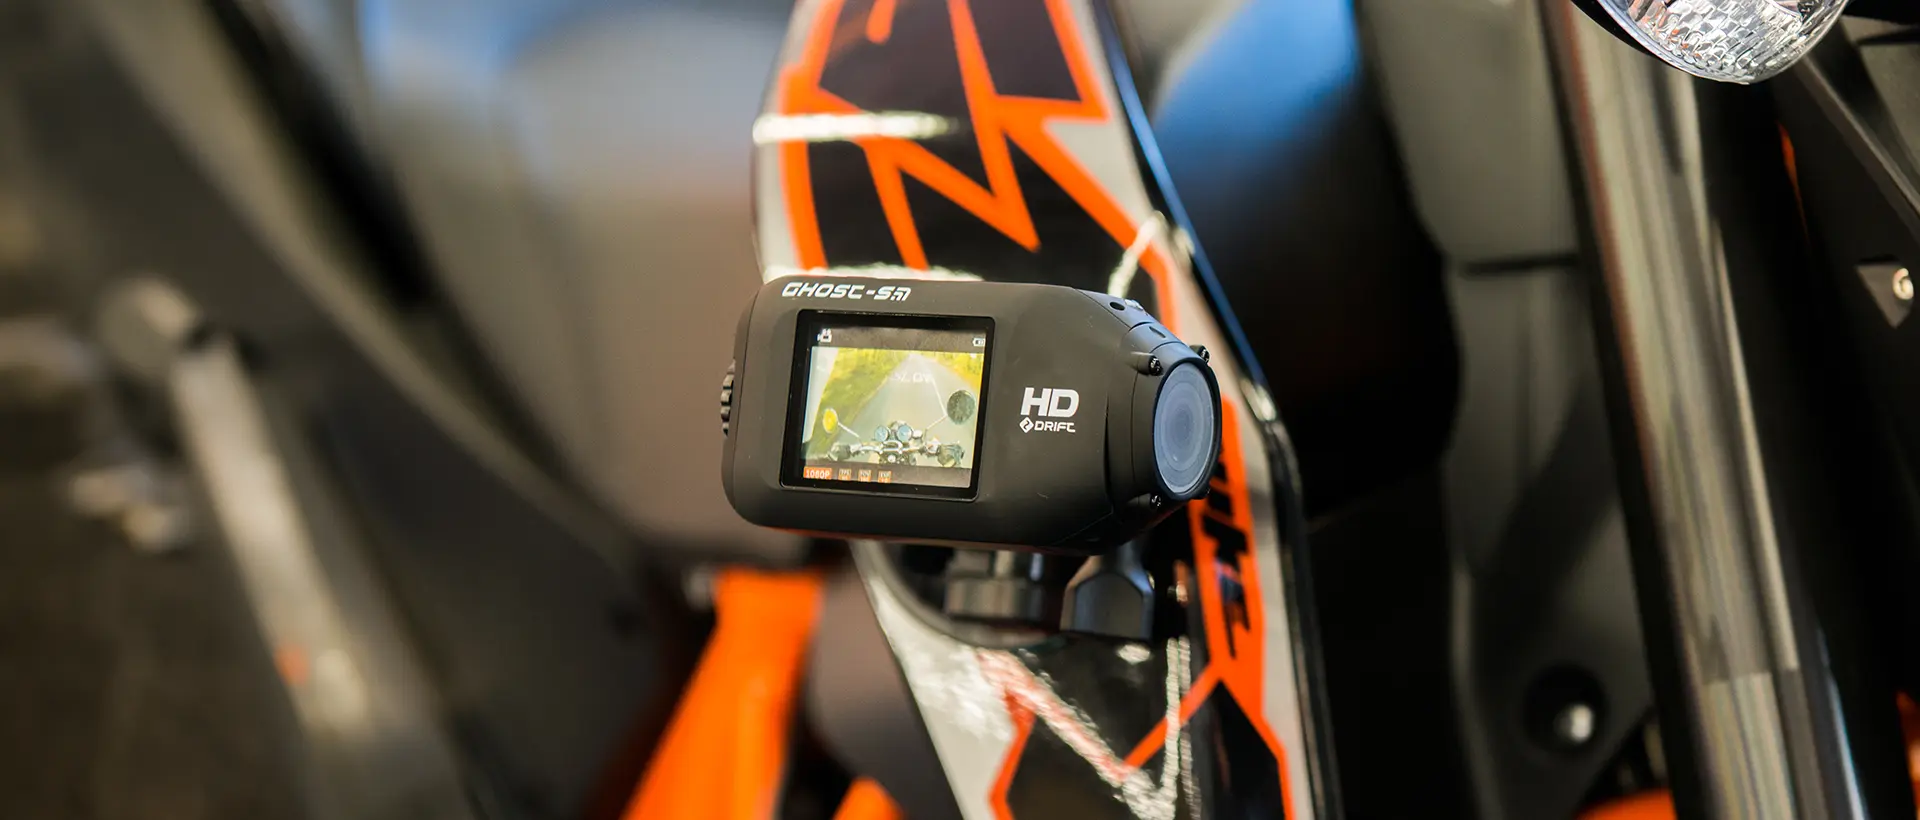 Fixing Your Action Camera to Your Motorcycle: A Complete Guide